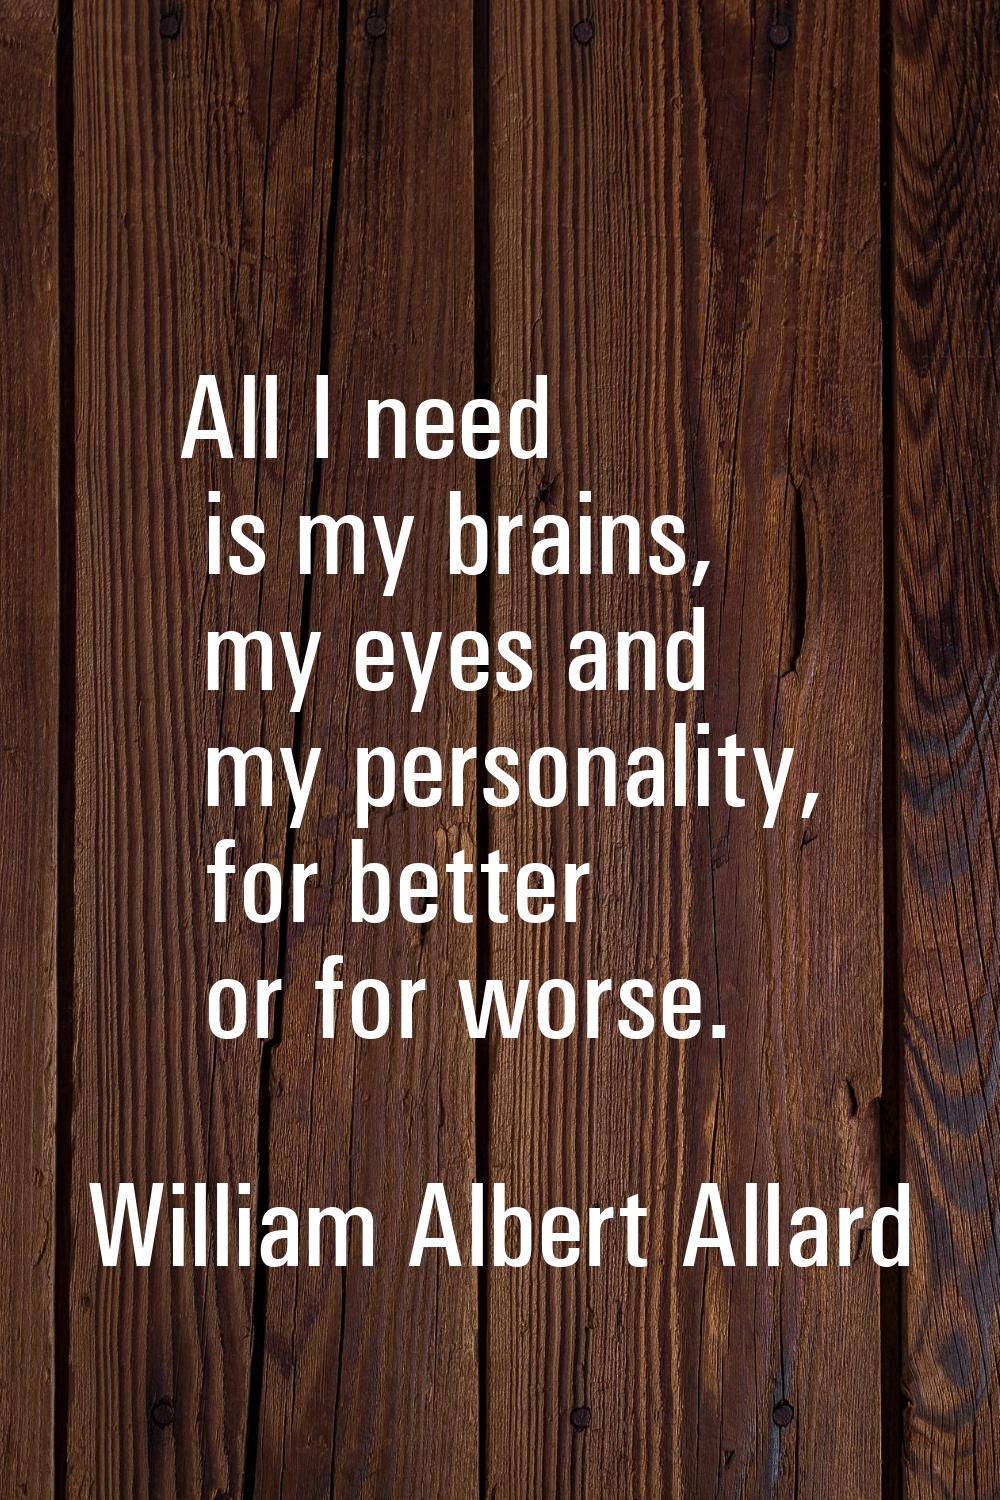 All I need is my brains, my eyes and my personality, for better or for worse.